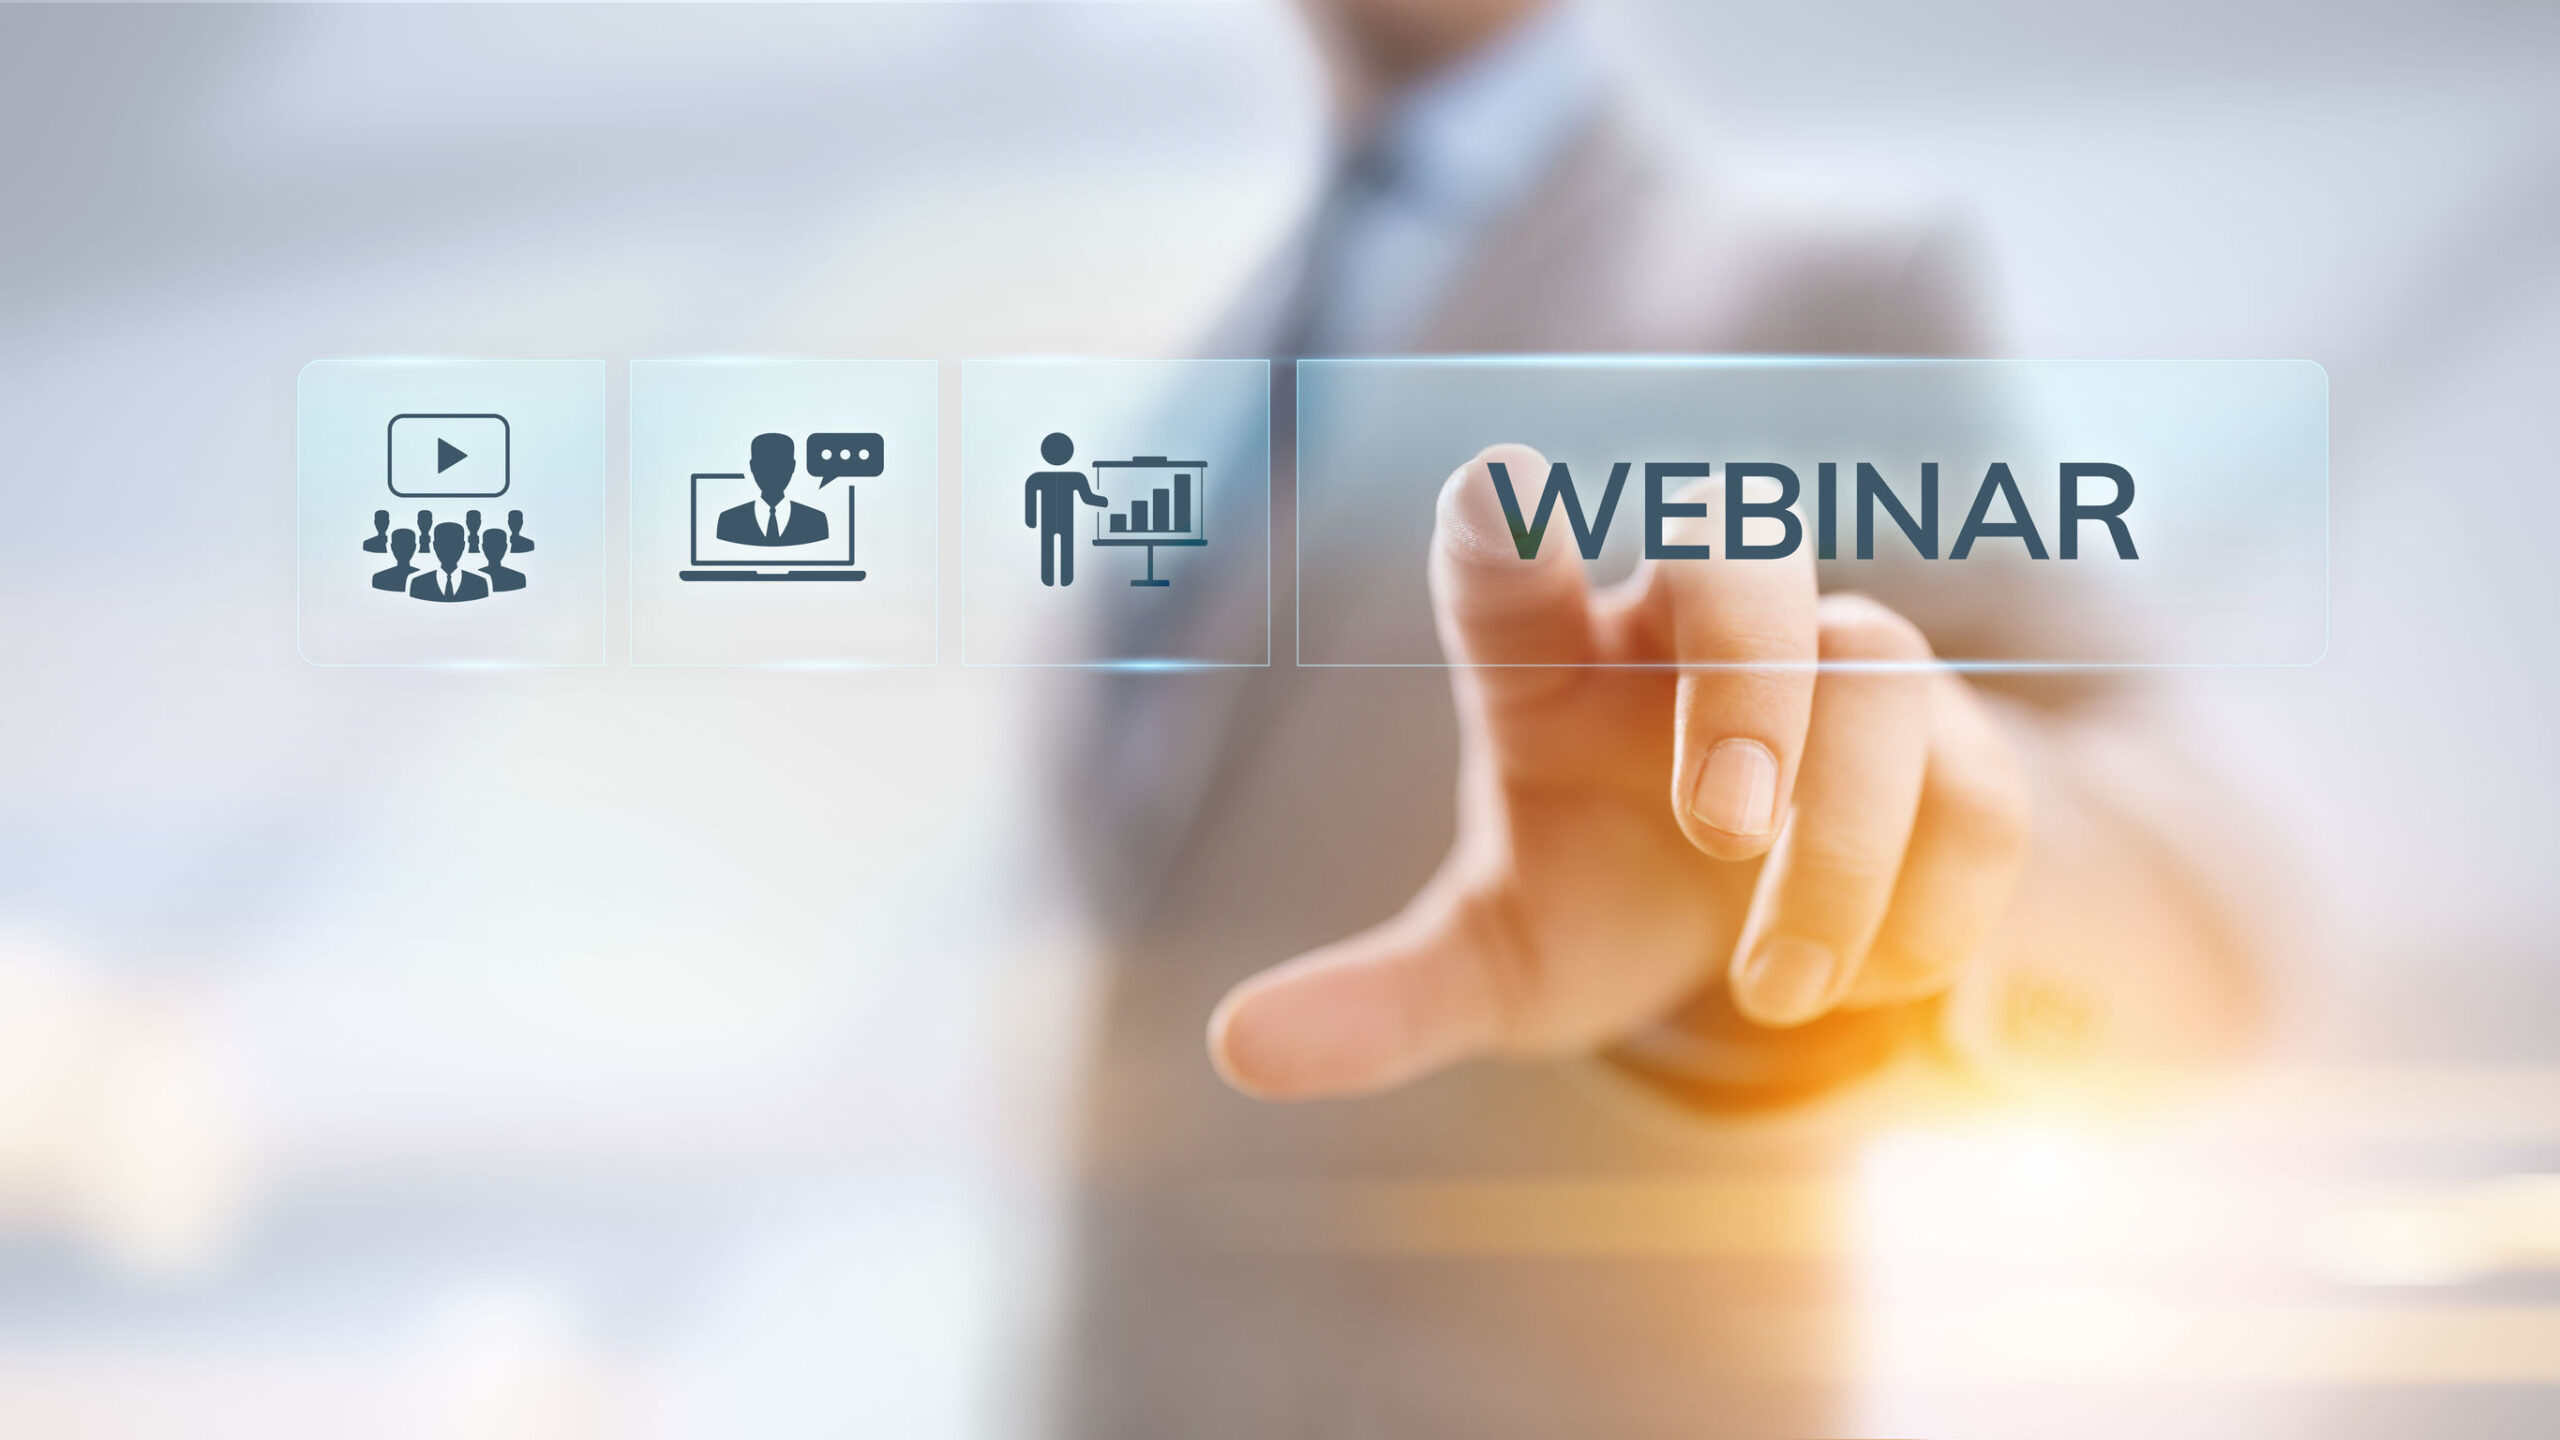 Explore What aACE Can Do for You in Our March Webinars